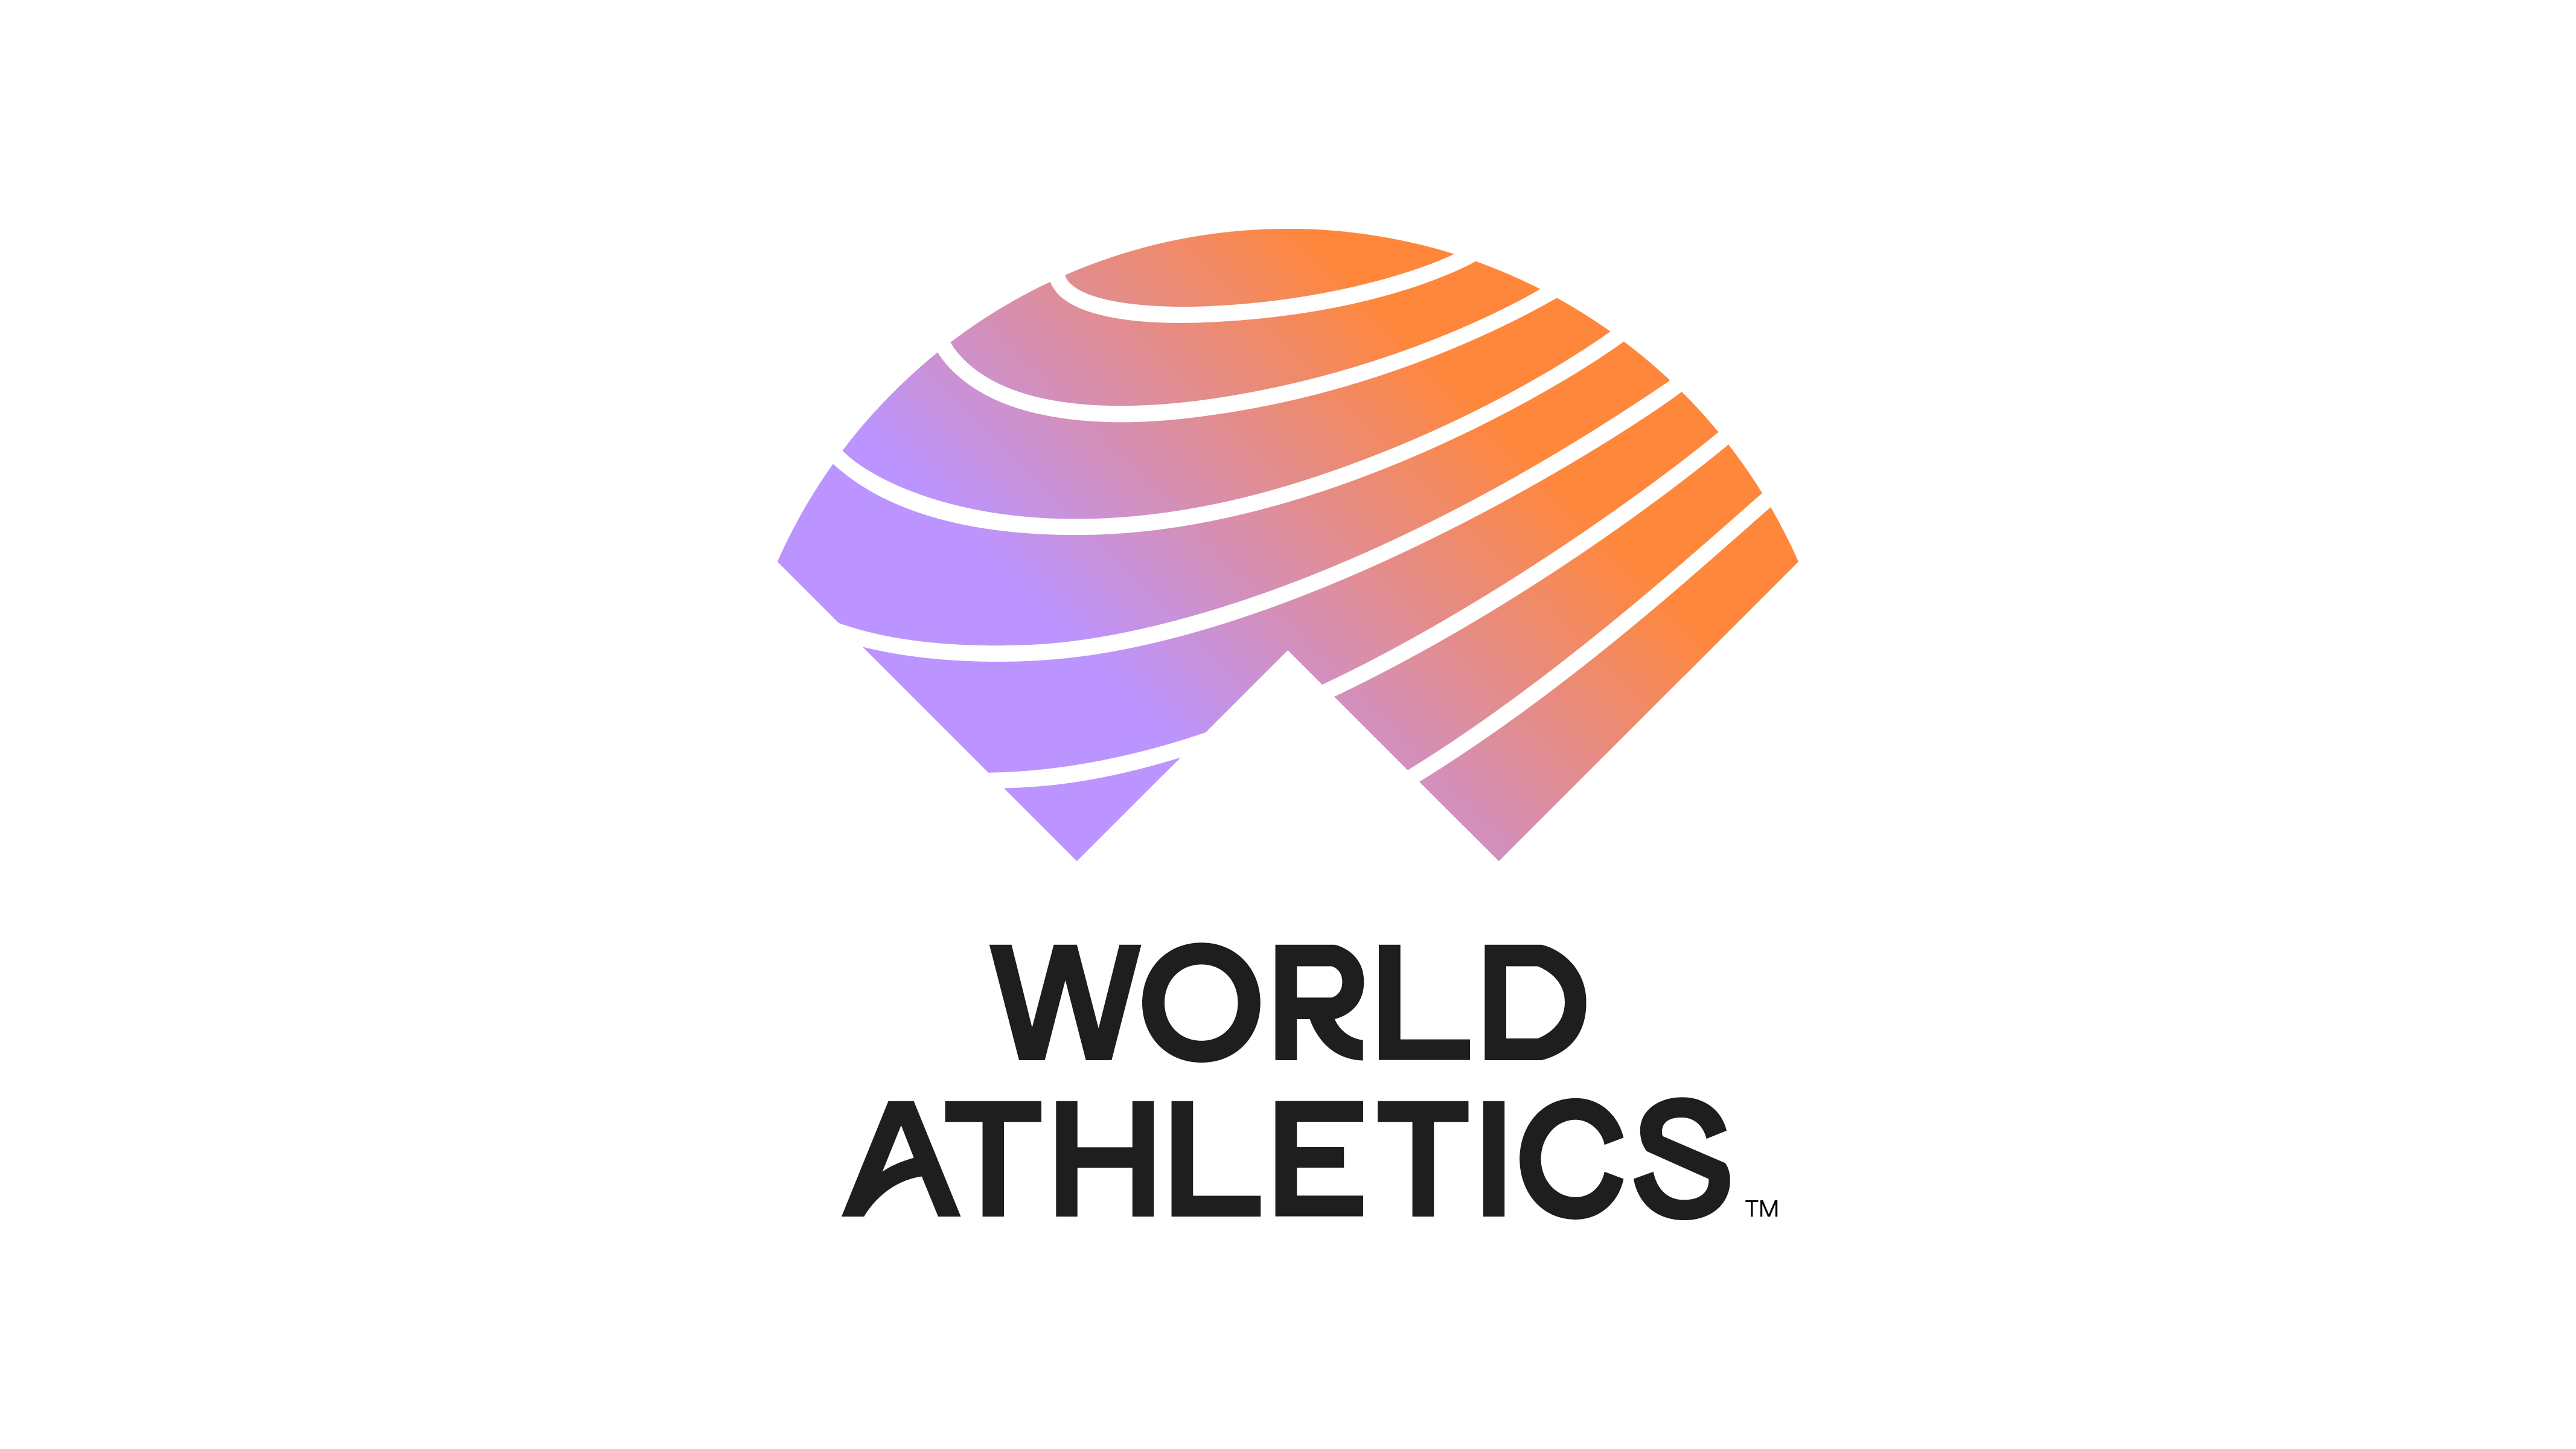 World Athletics describes as “extremely serious” charges against RusAF